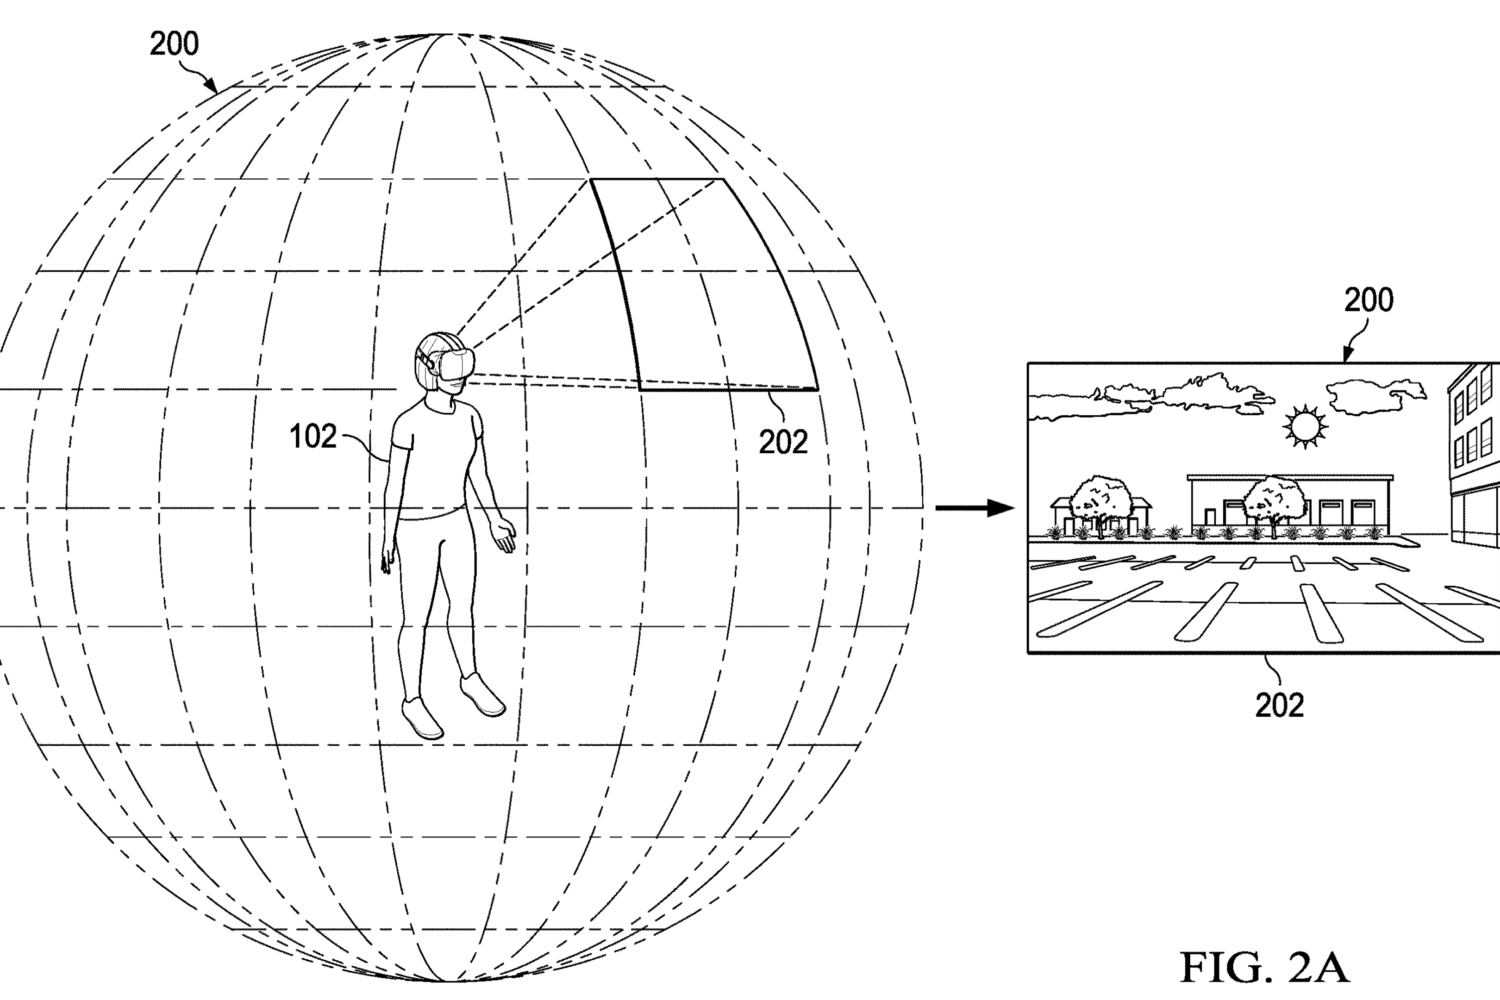 Patent drawing showing a user wearing a headset and enjoying immersive video in all directions